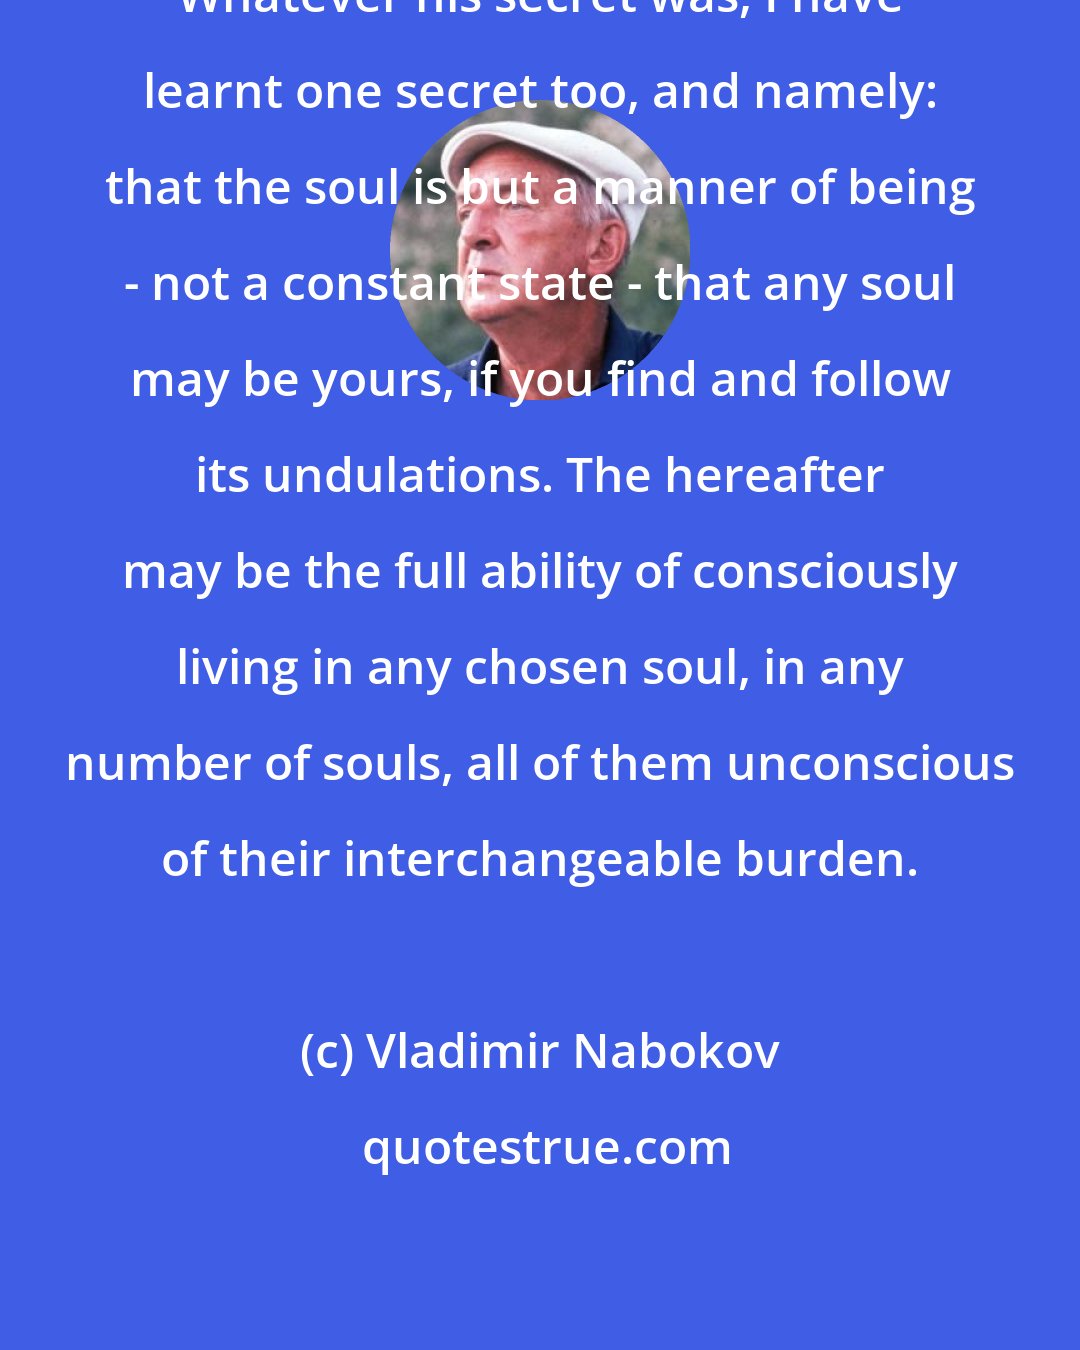 Vladimir Nabokov: Whatever his secret was, I have learnt one secret too, and namely: that the soul is but a manner of being - not a constant state - that any soul may be yours, if you find and follow its undulations. The hereafter may be the full ability of consciously living in any chosen soul, in any number of souls, all of them unconscious of their interchangeable burden.